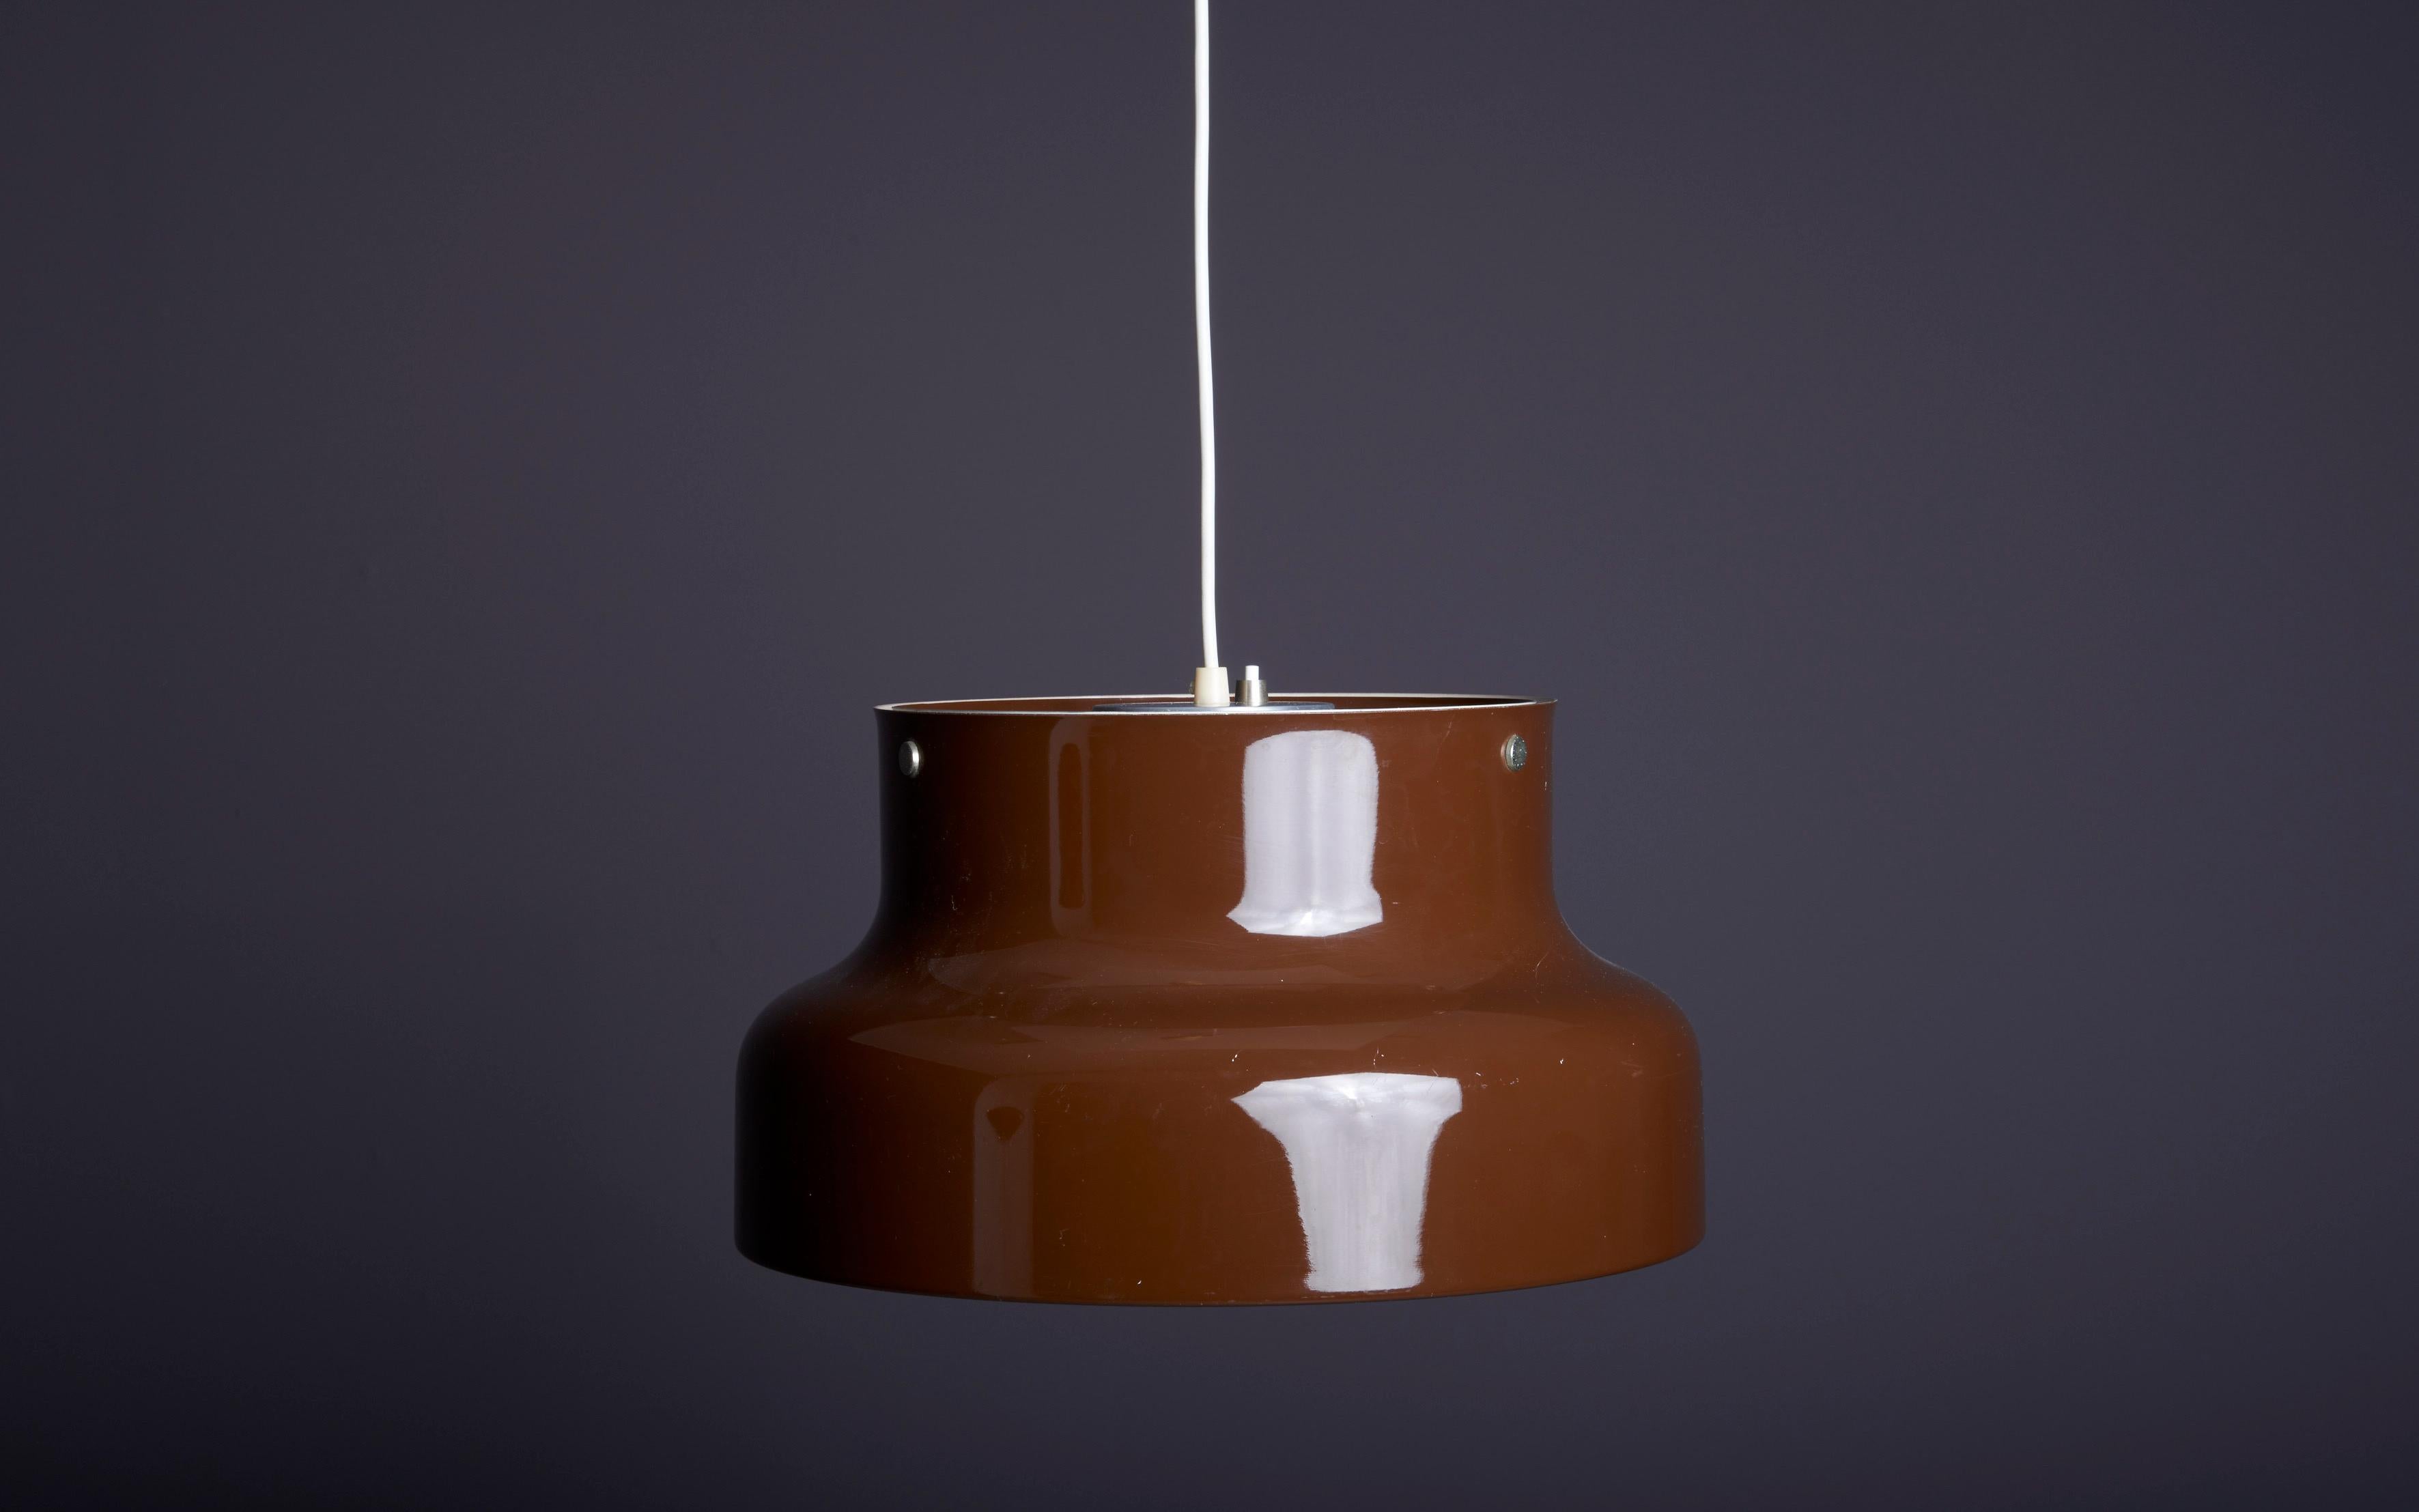 'Bumling' pendant lamp by Anders Pehrson for Ateljé Lyktan, Sweden 1960s. 
Socket: 1 x E27. ‘Bumling’ is the Swedish term for boulder, a name that has been attributed to Pehrson's lamp when it was first exhibited at the 1968 lighting fair in